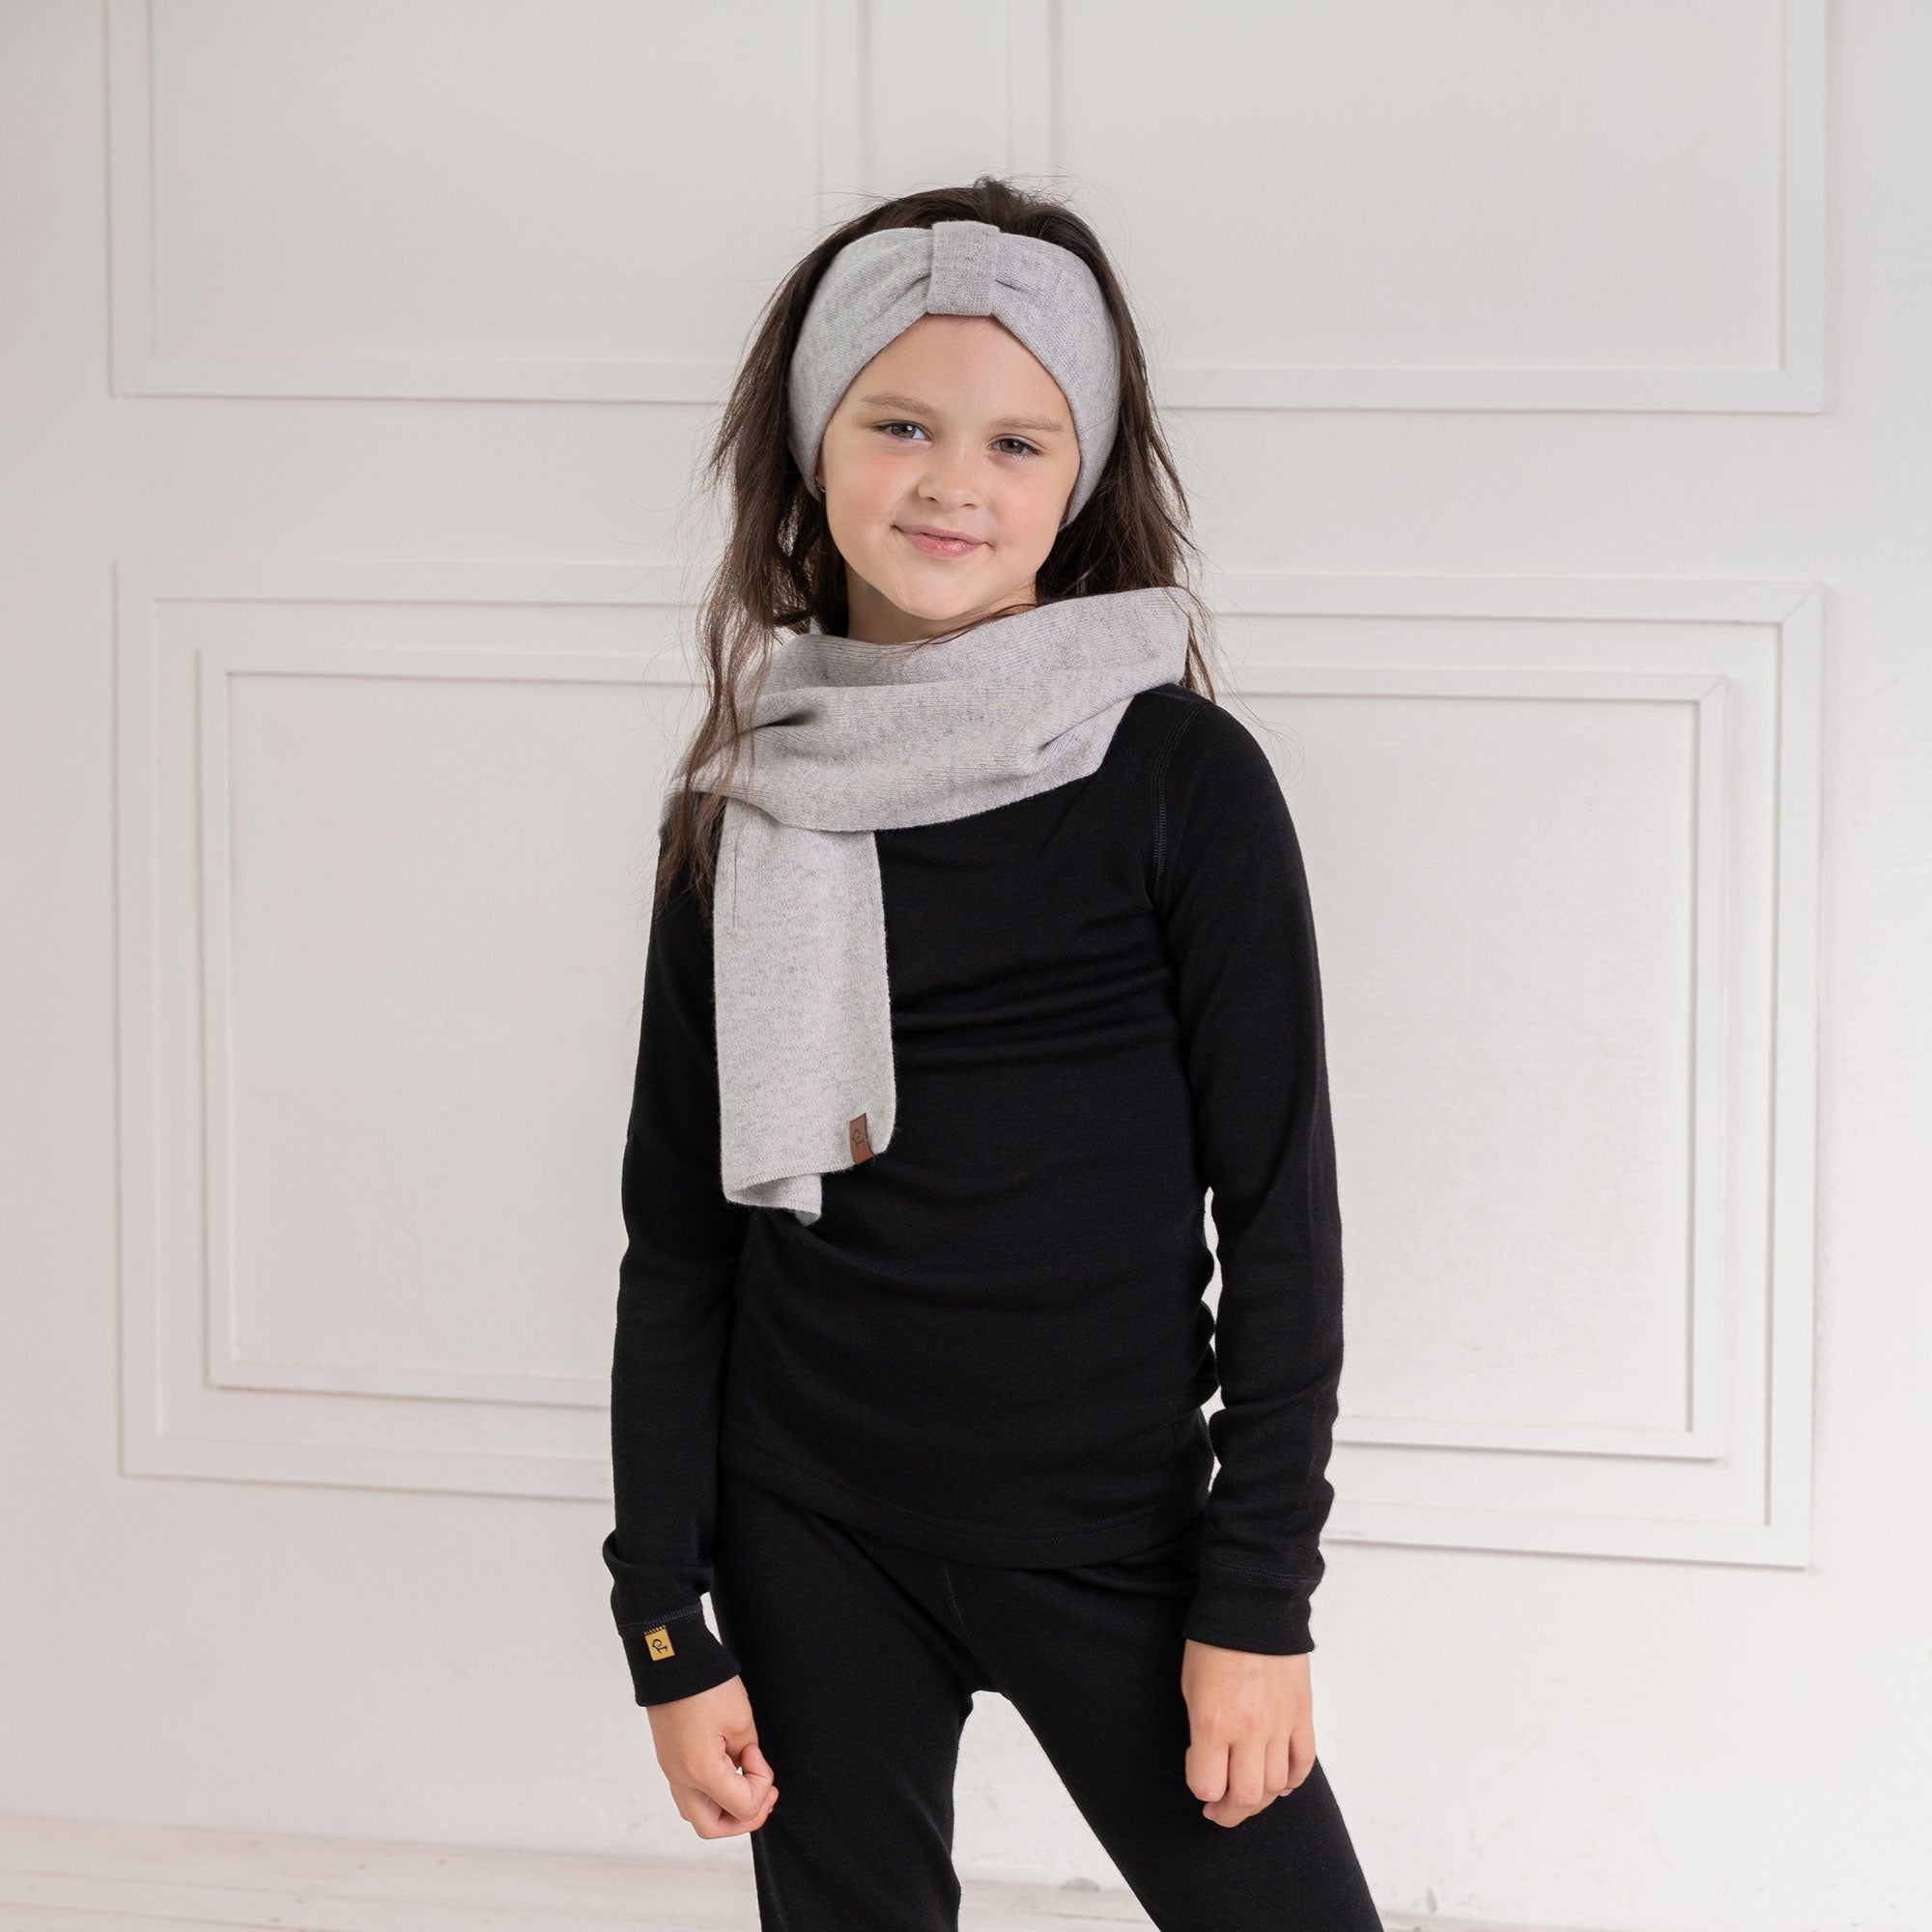 Cashmere Kids Cashmere Snood Cache Cou Enfant Cachemire Childrens Neck  Warmer Cahmere Knitted Kids Scarf Baby Scarf Knit Wool Scarf 